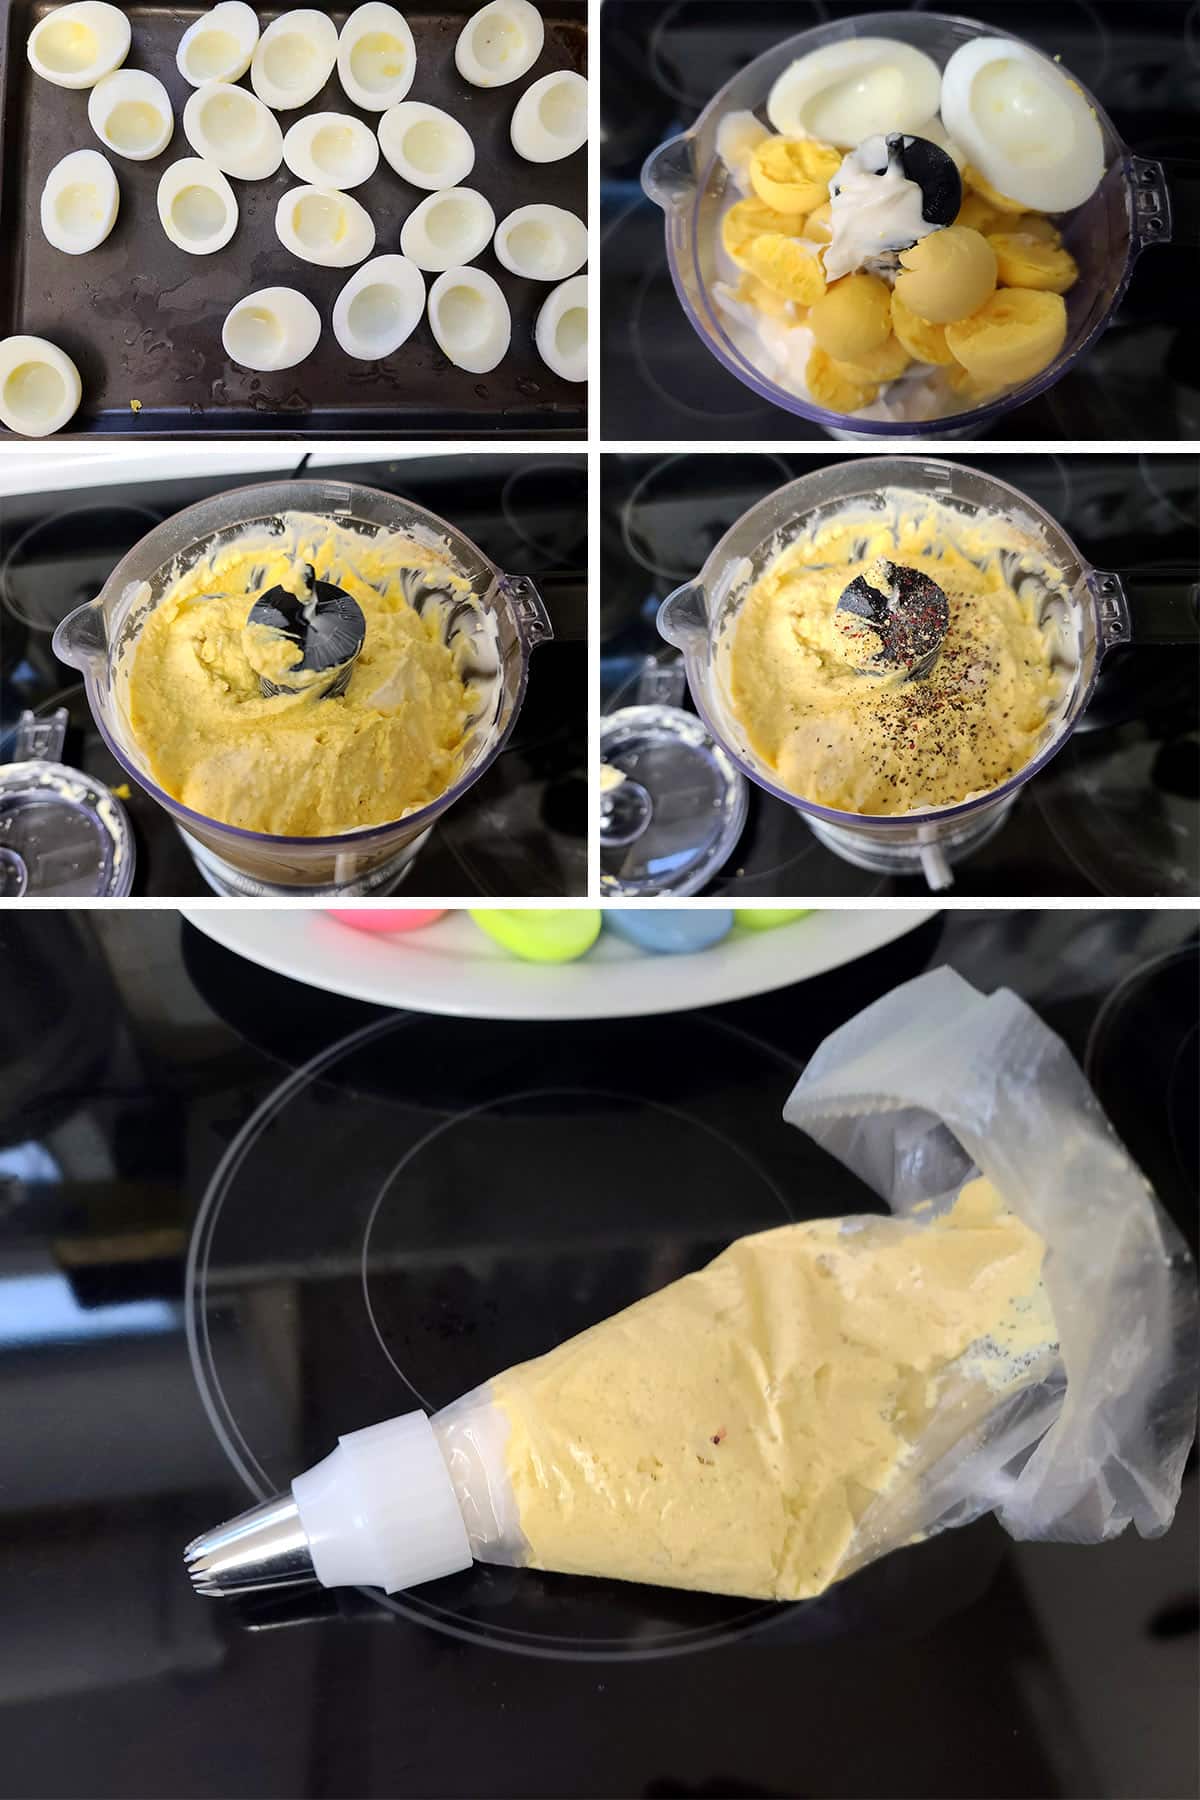 A 5 part image showing the filling being made in a food processor then spoon into a piping bag.